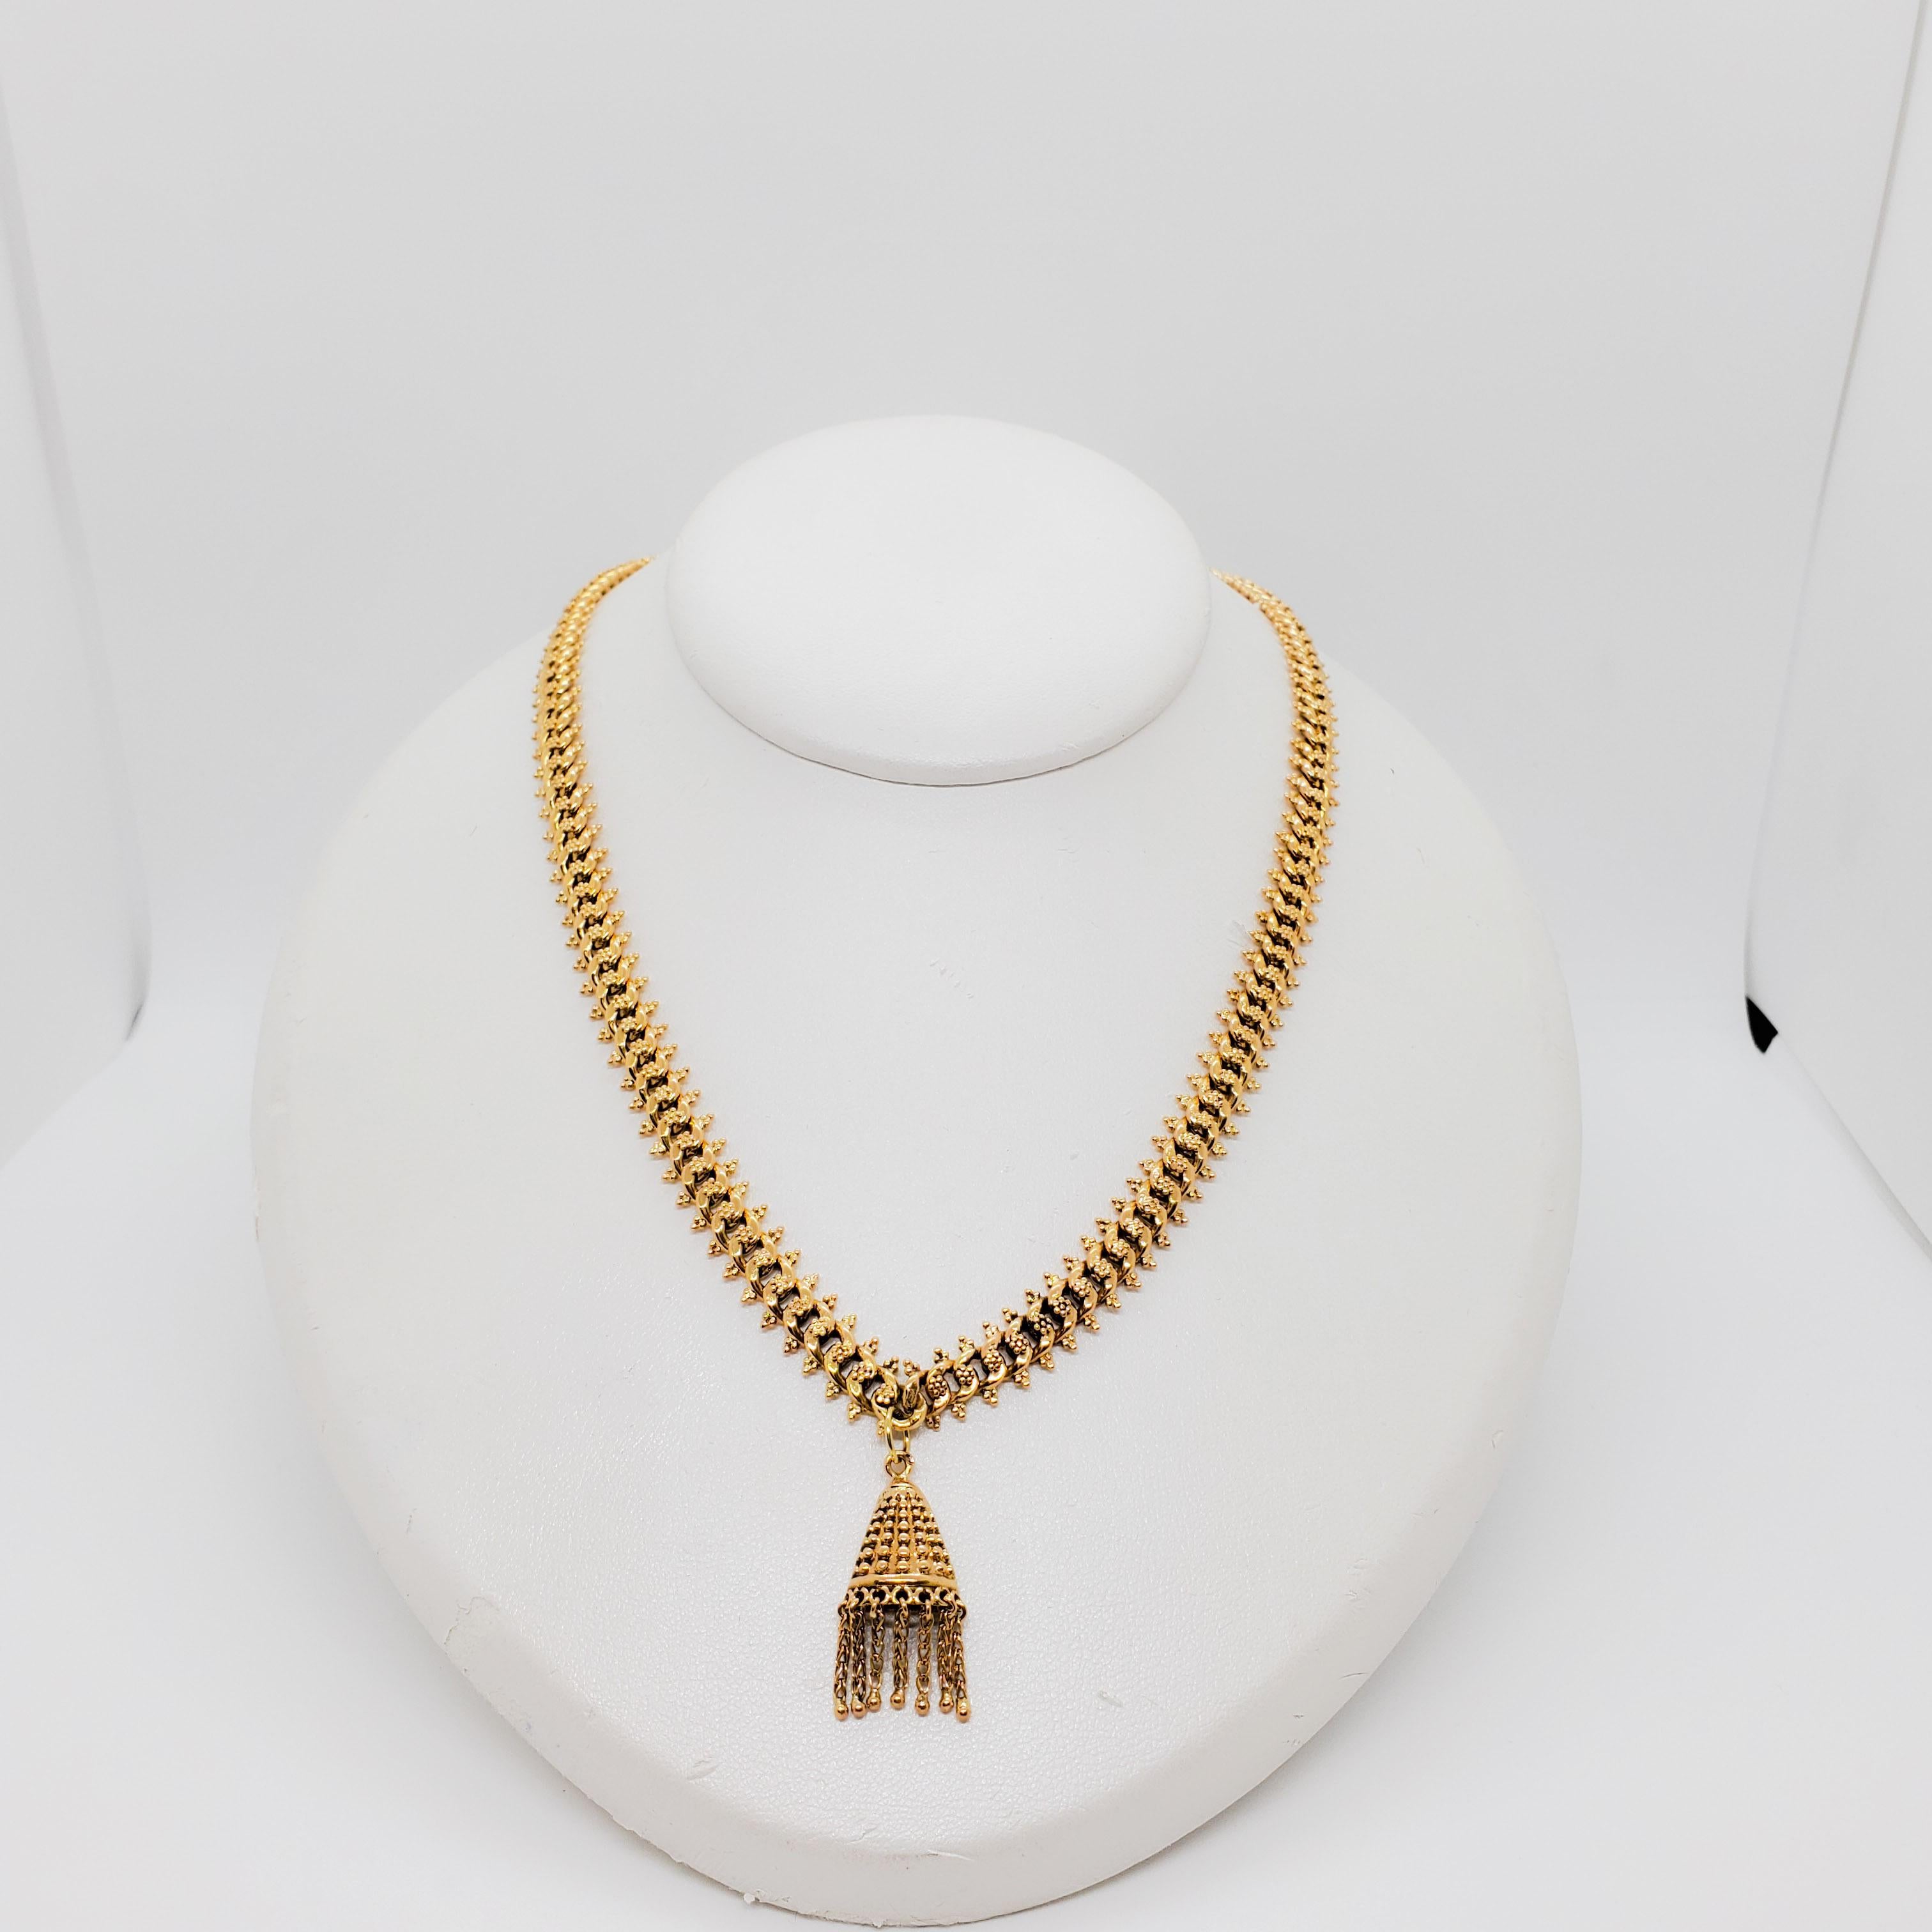 Beautiful 18k yellow gold necklace with a tassel pendant.  Excellent condition. 17